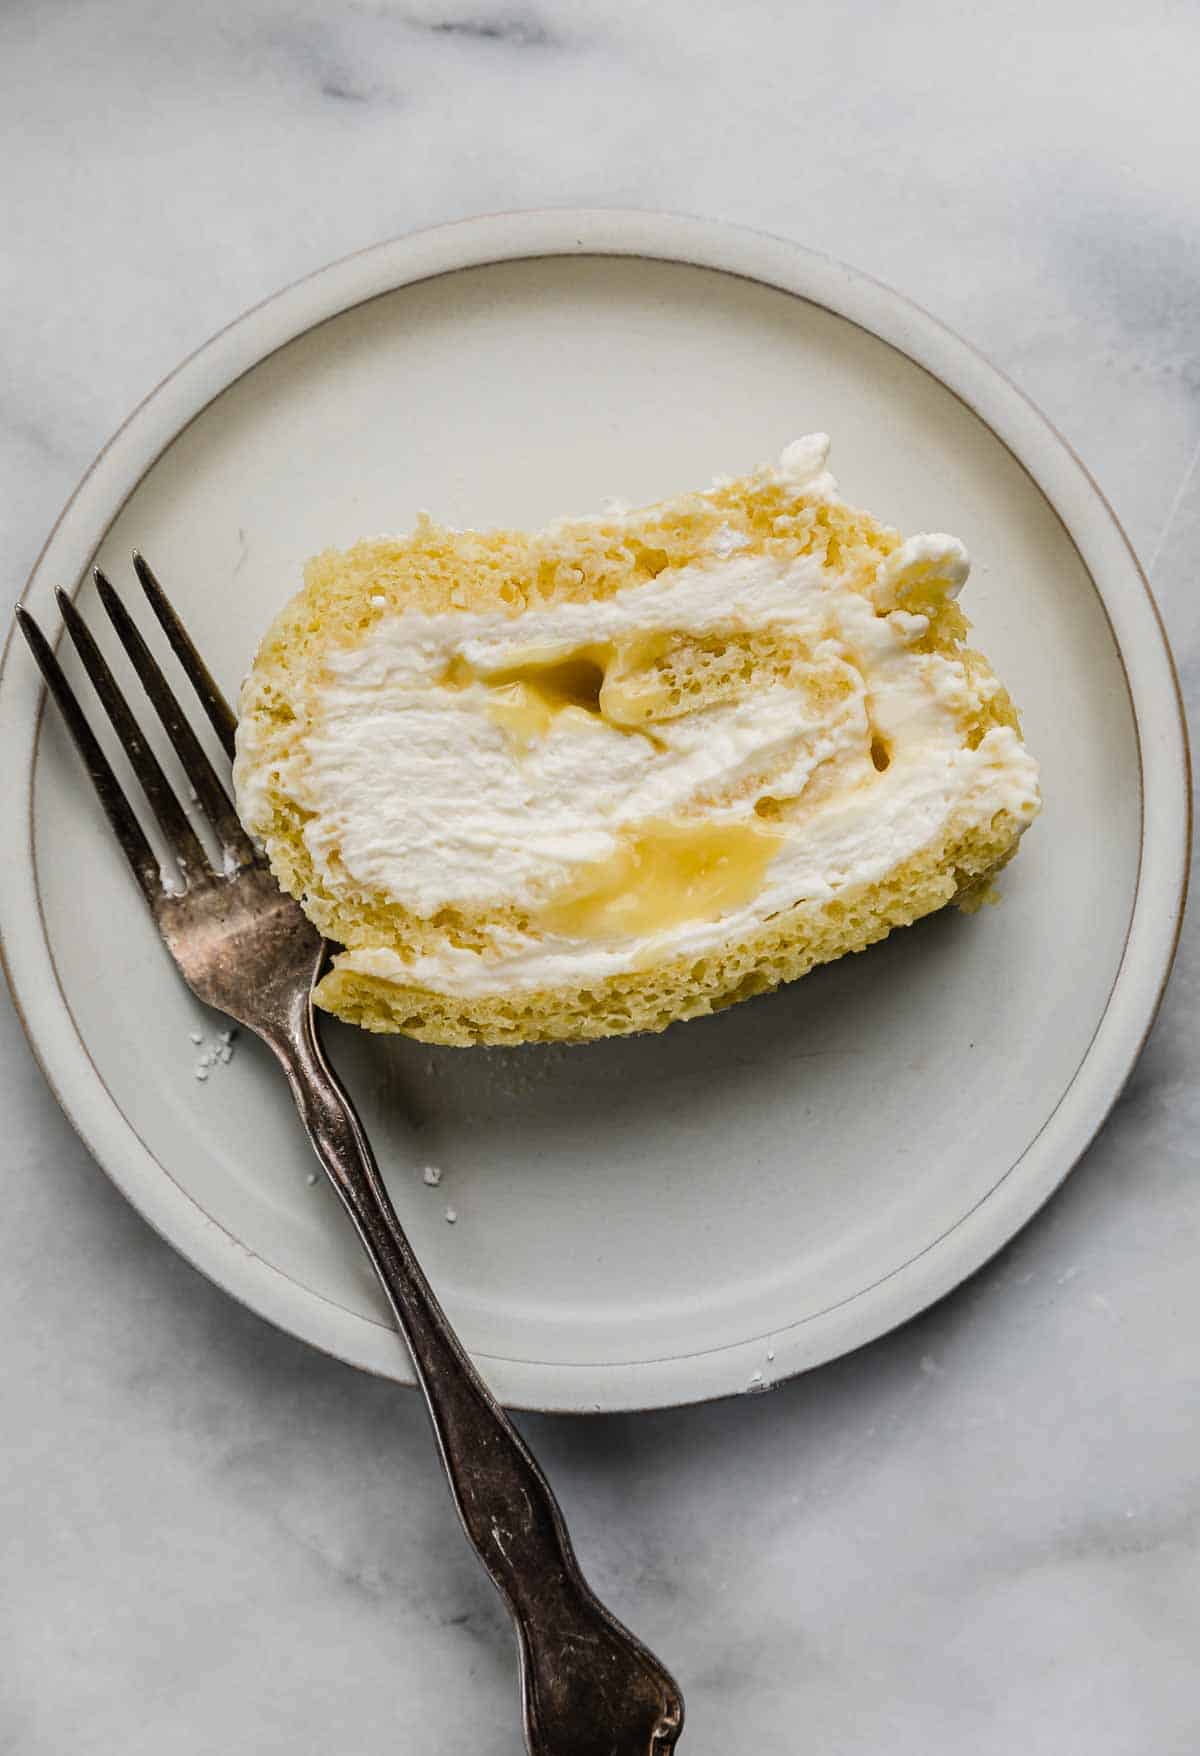 A slice of Lemon Swiss Roll filled with cream and lemon curd, on a white plate with a fork to the left of the cake.